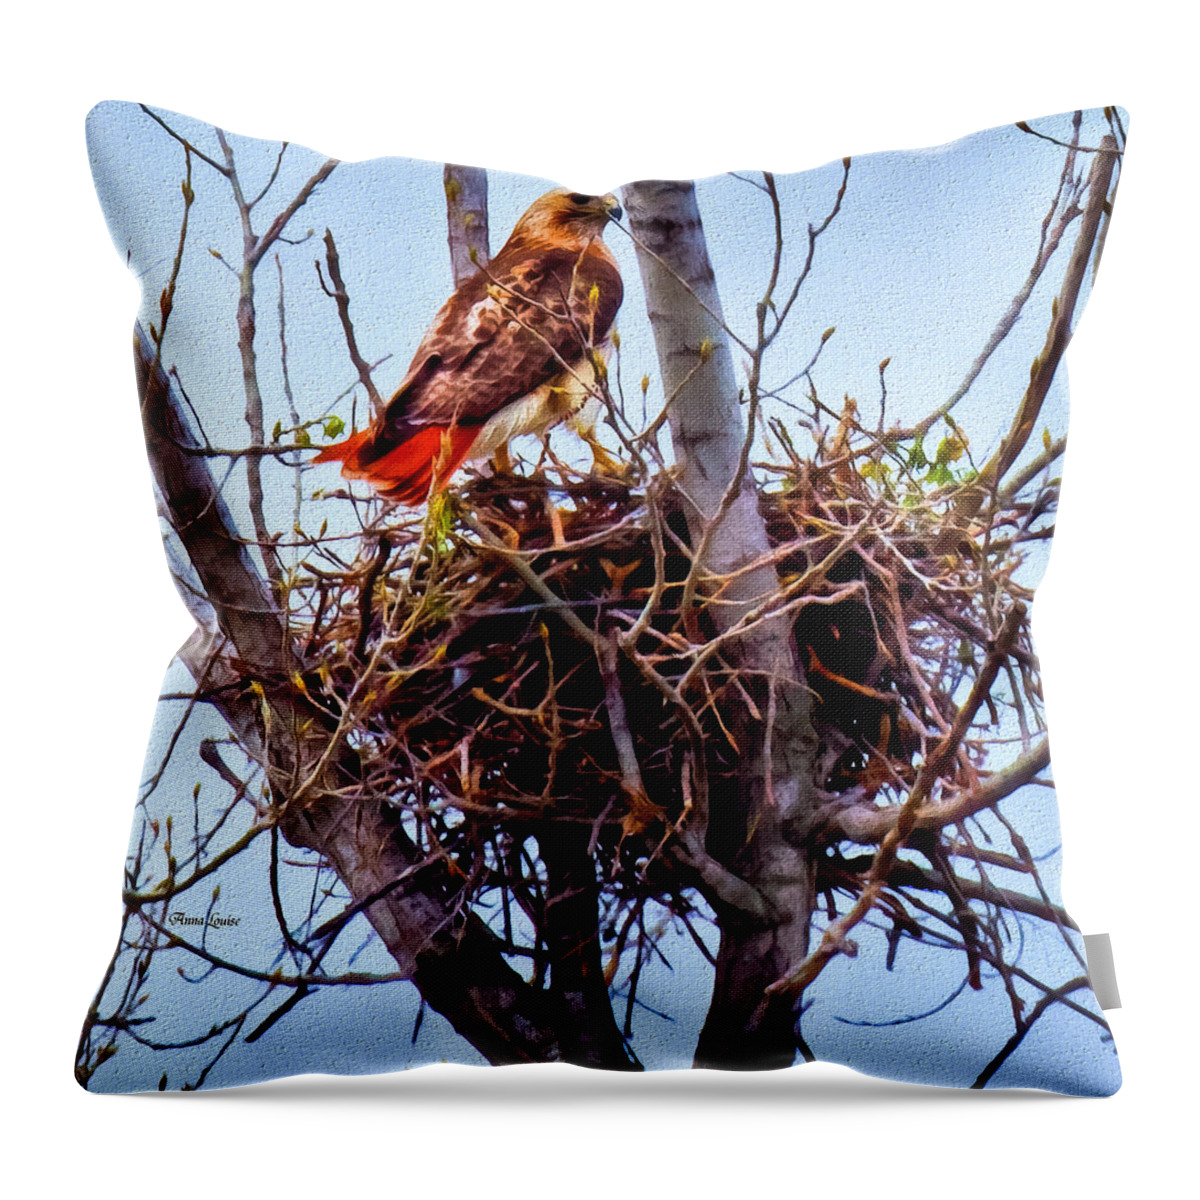 Red-tailed Hawk Throw Pillow featuring the photograph Red-tailed Hawk On Nest by Anna Louise